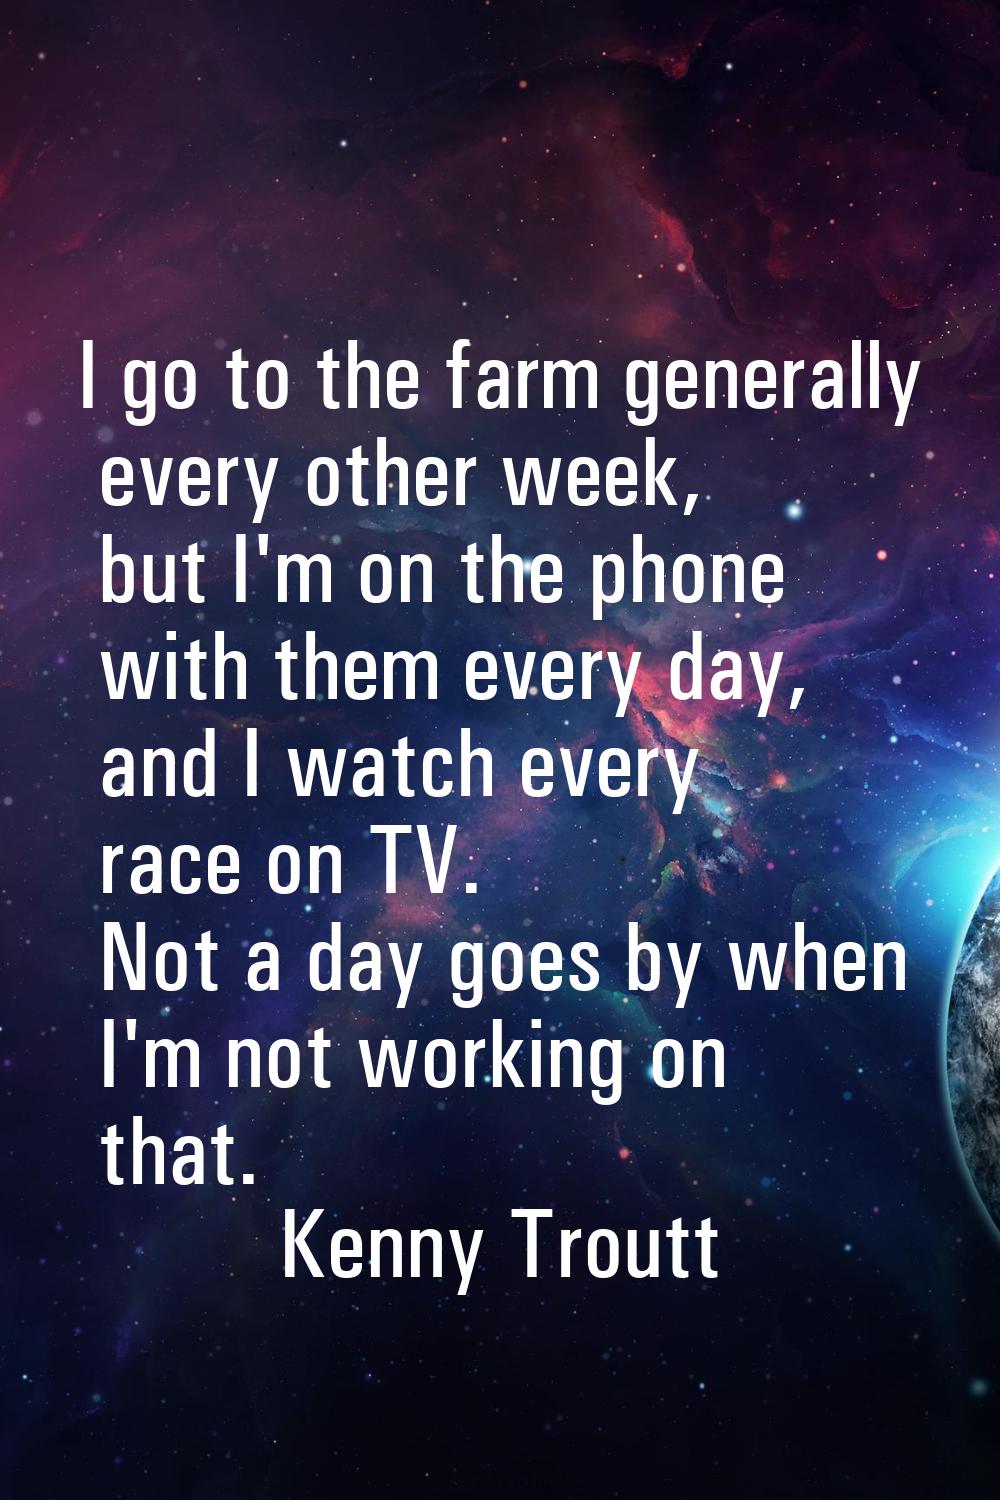 I go to the farm generally every other week, but I'm on the phone with them every day, and I watch 